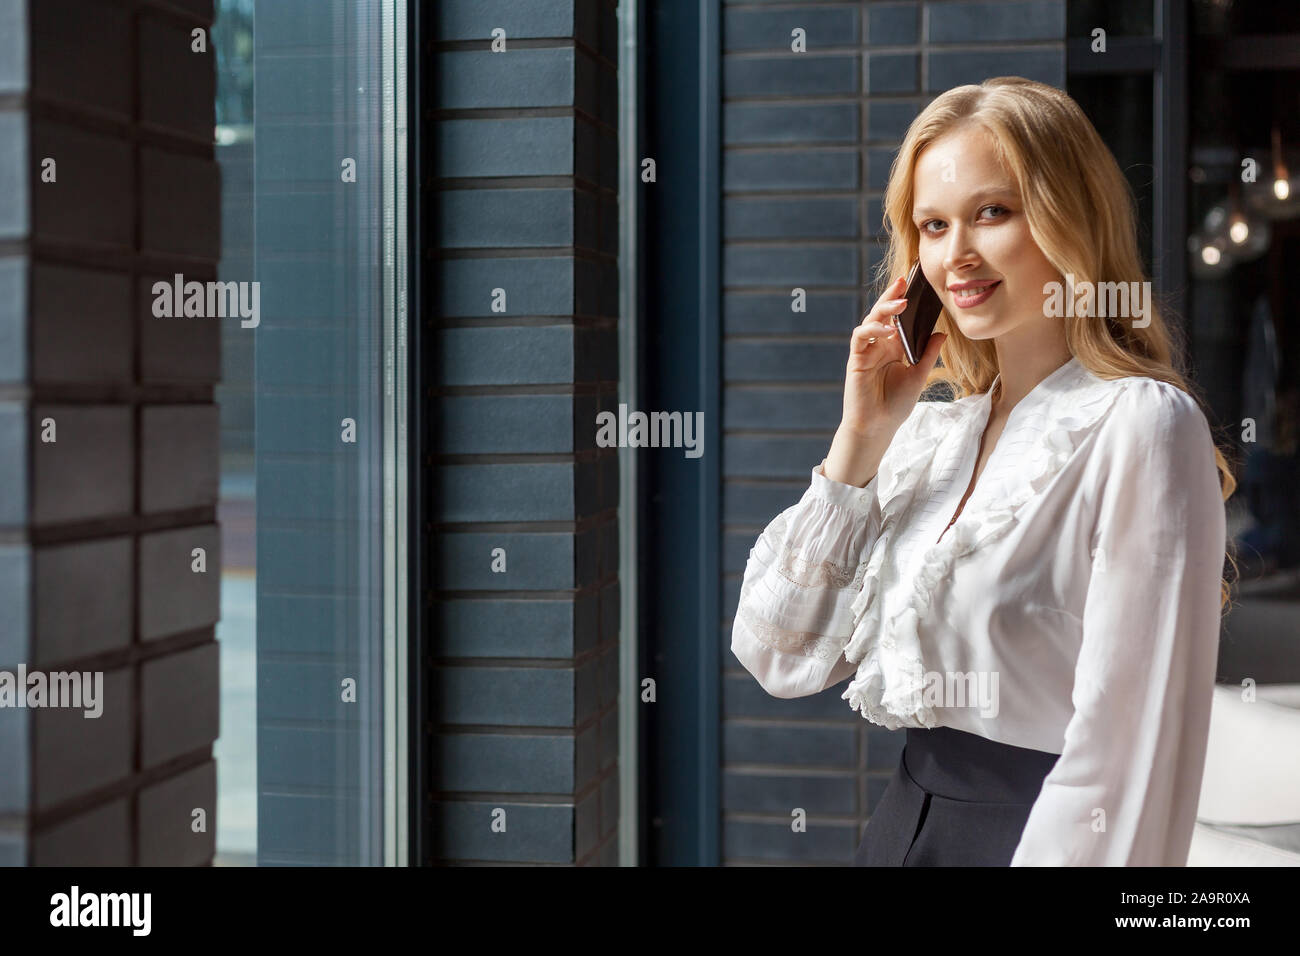 Portrait of happy successful businesswoman with long blond hair in stylish classic shirt smiling at camera and talking on cellphone, busy lifestyle. s Stock Photo